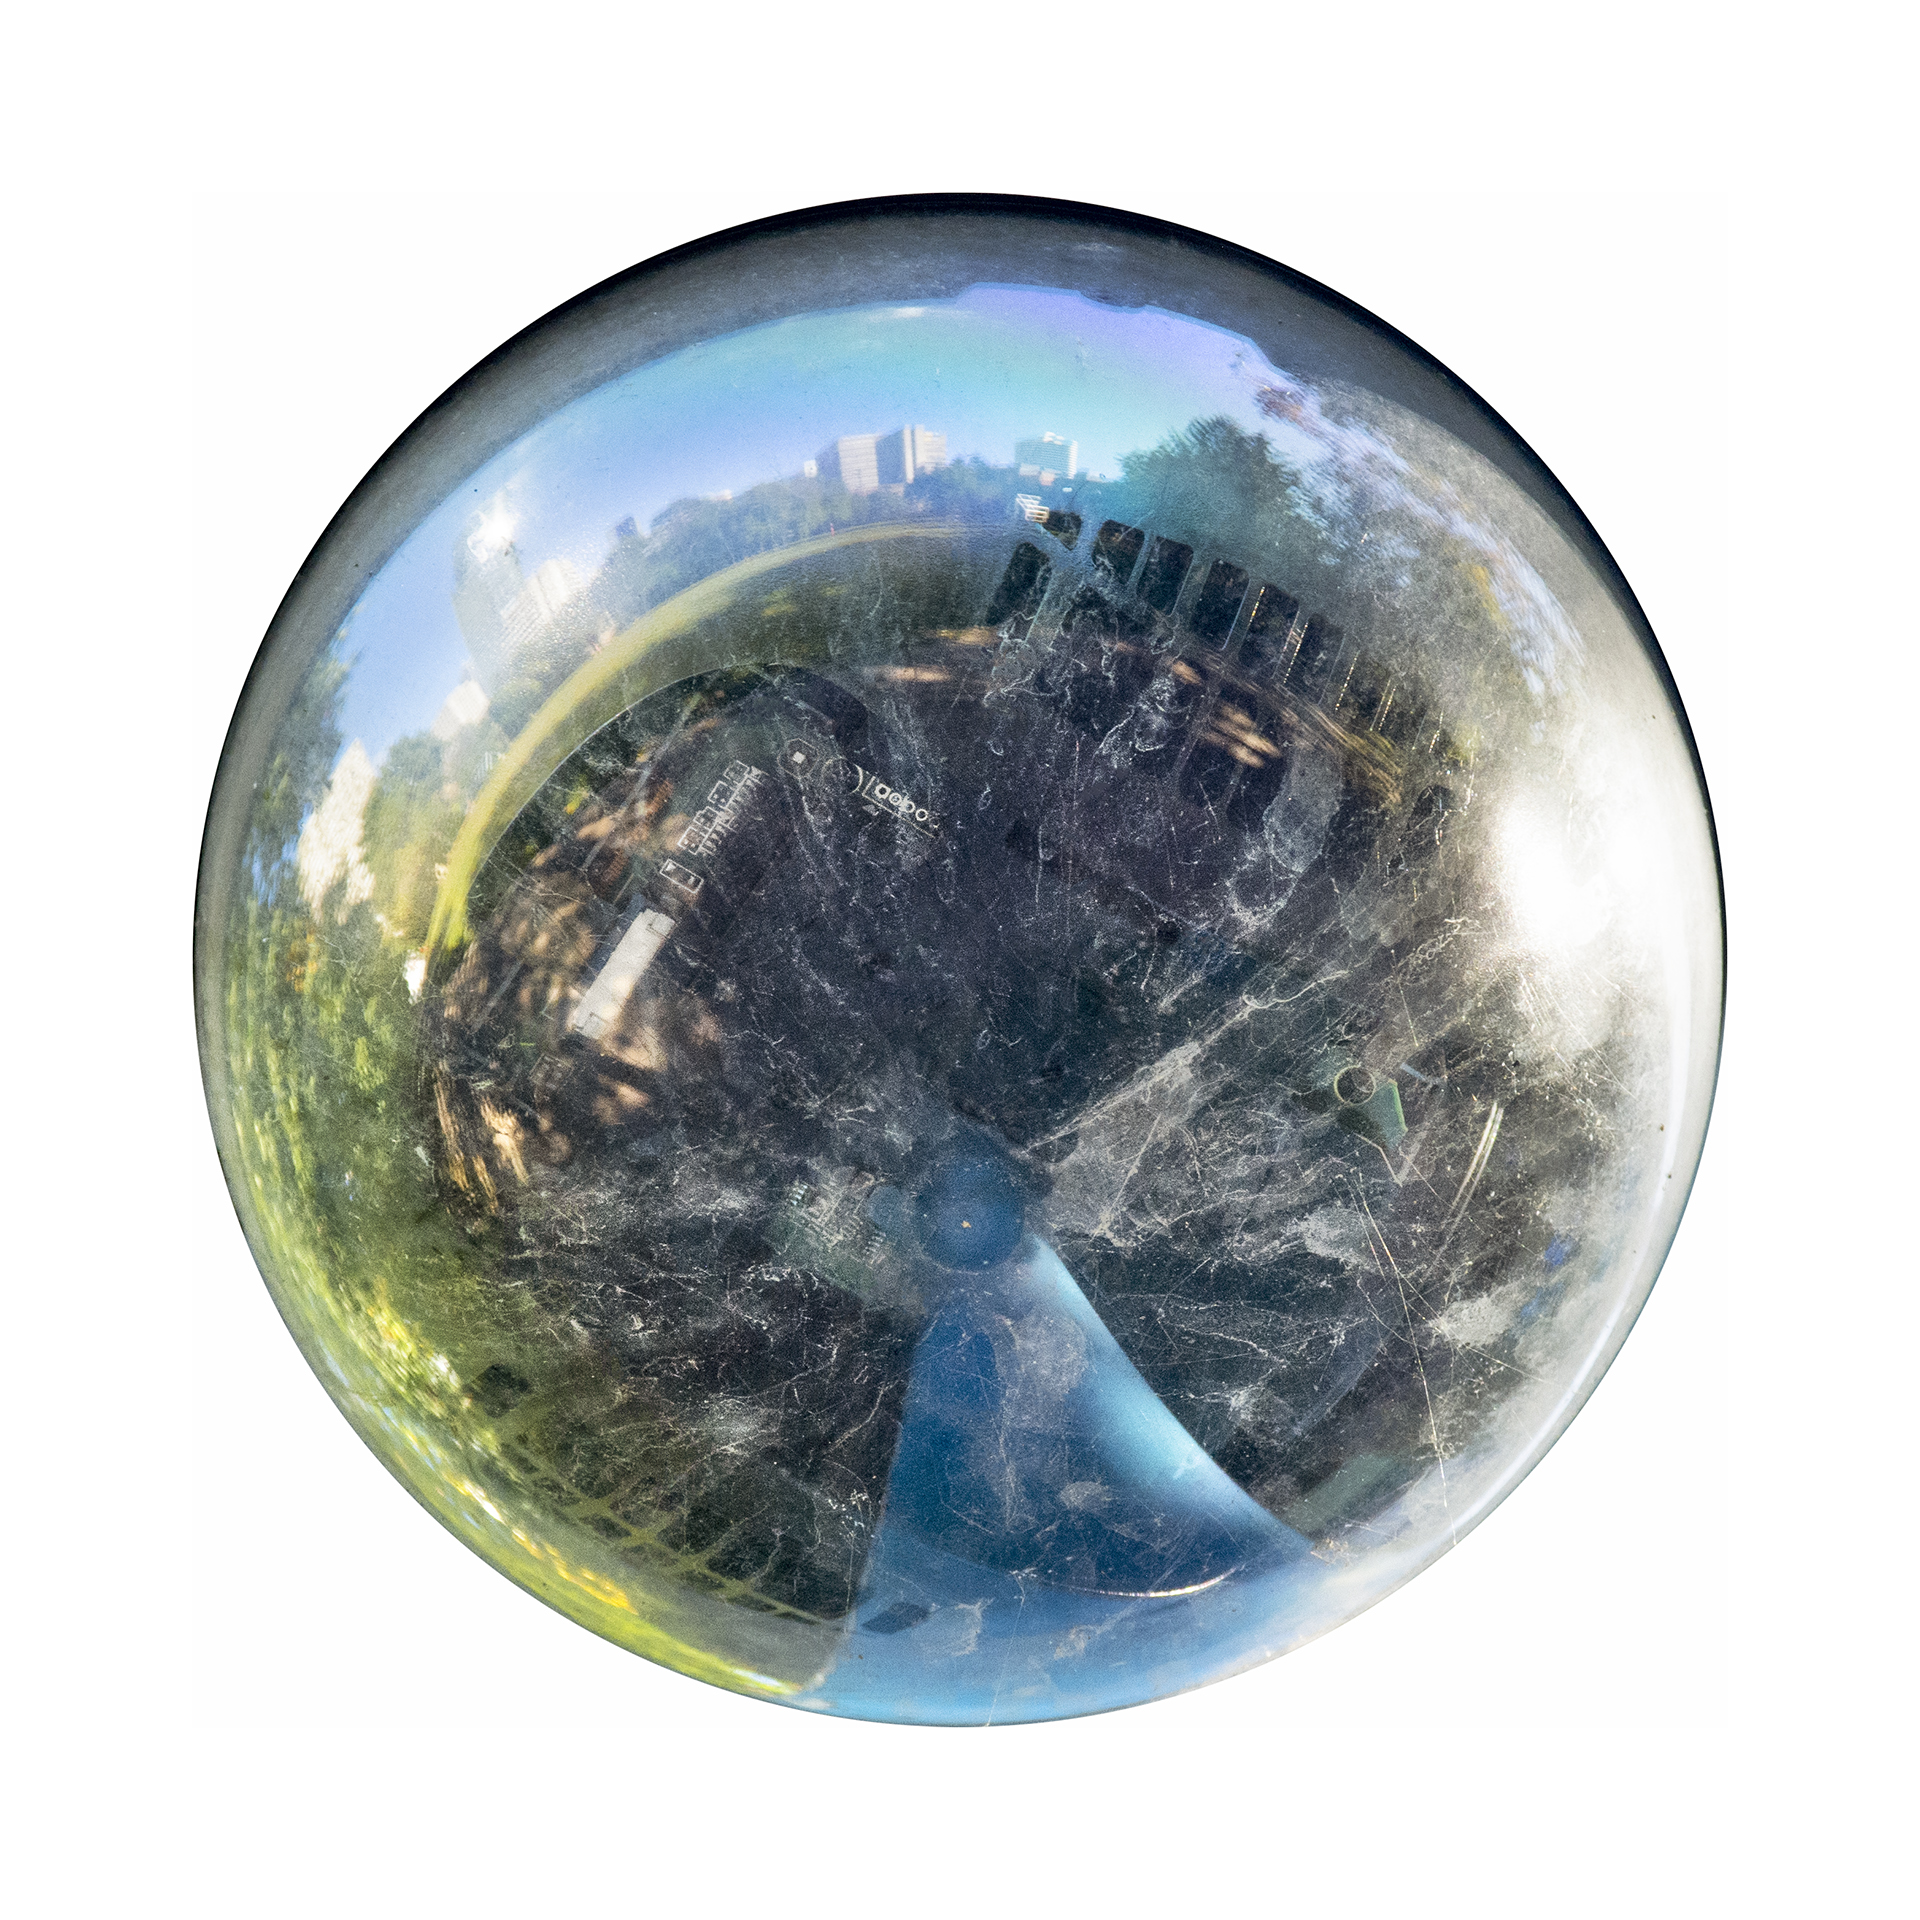 Distorted reflection of urban cityscape and park in a circular security camera lens.